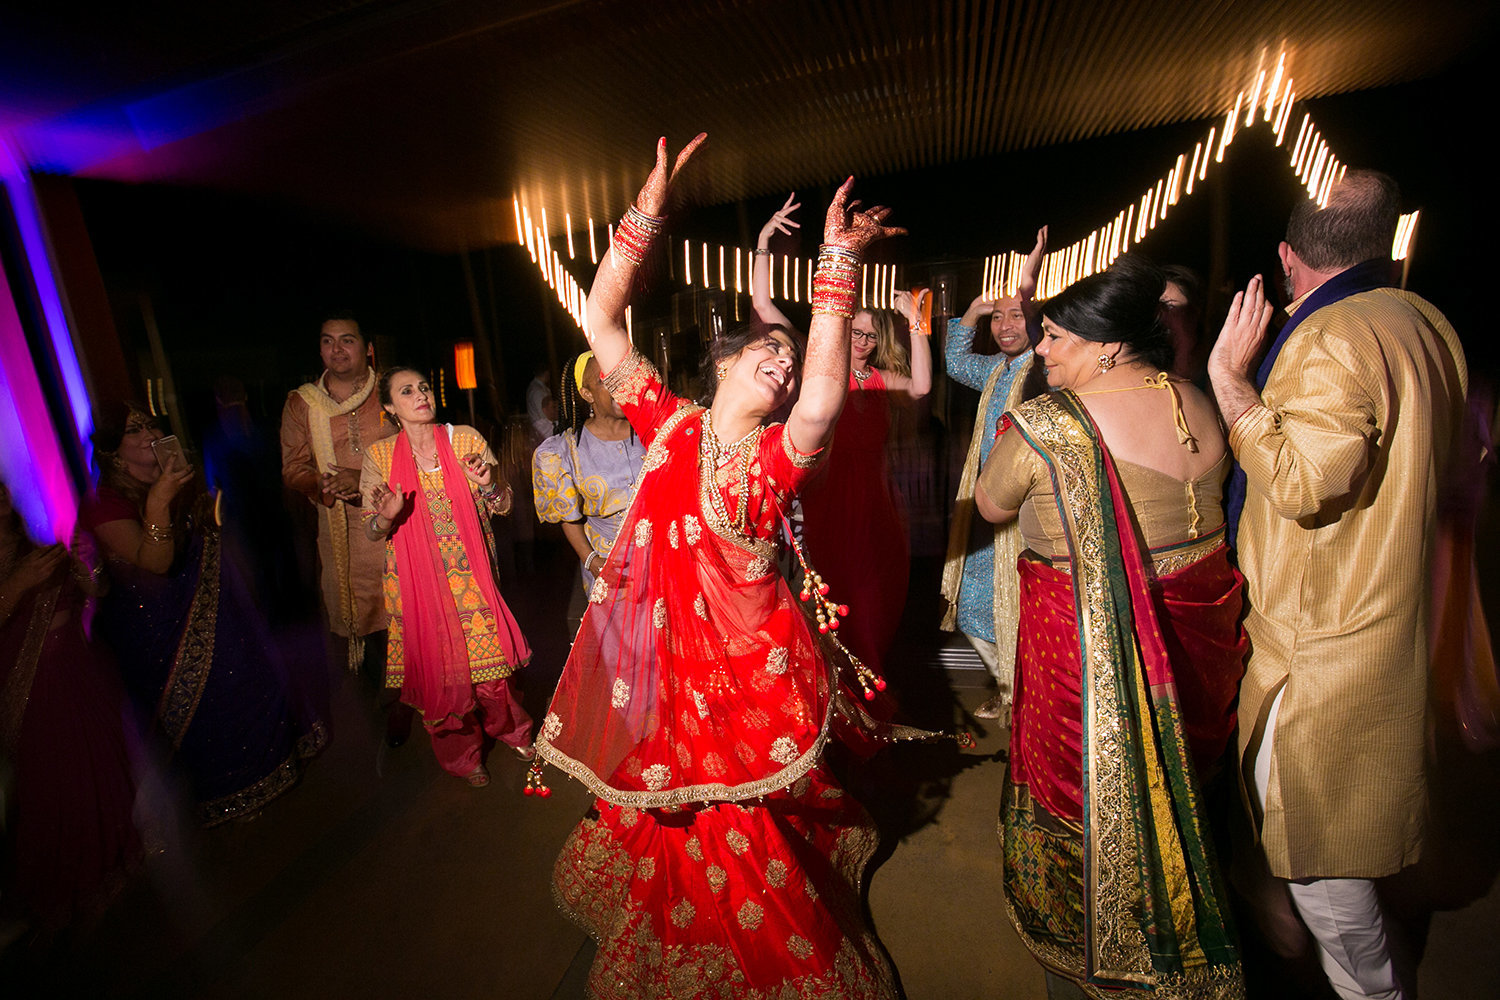 Dancing during the reception party at an Indian wedding